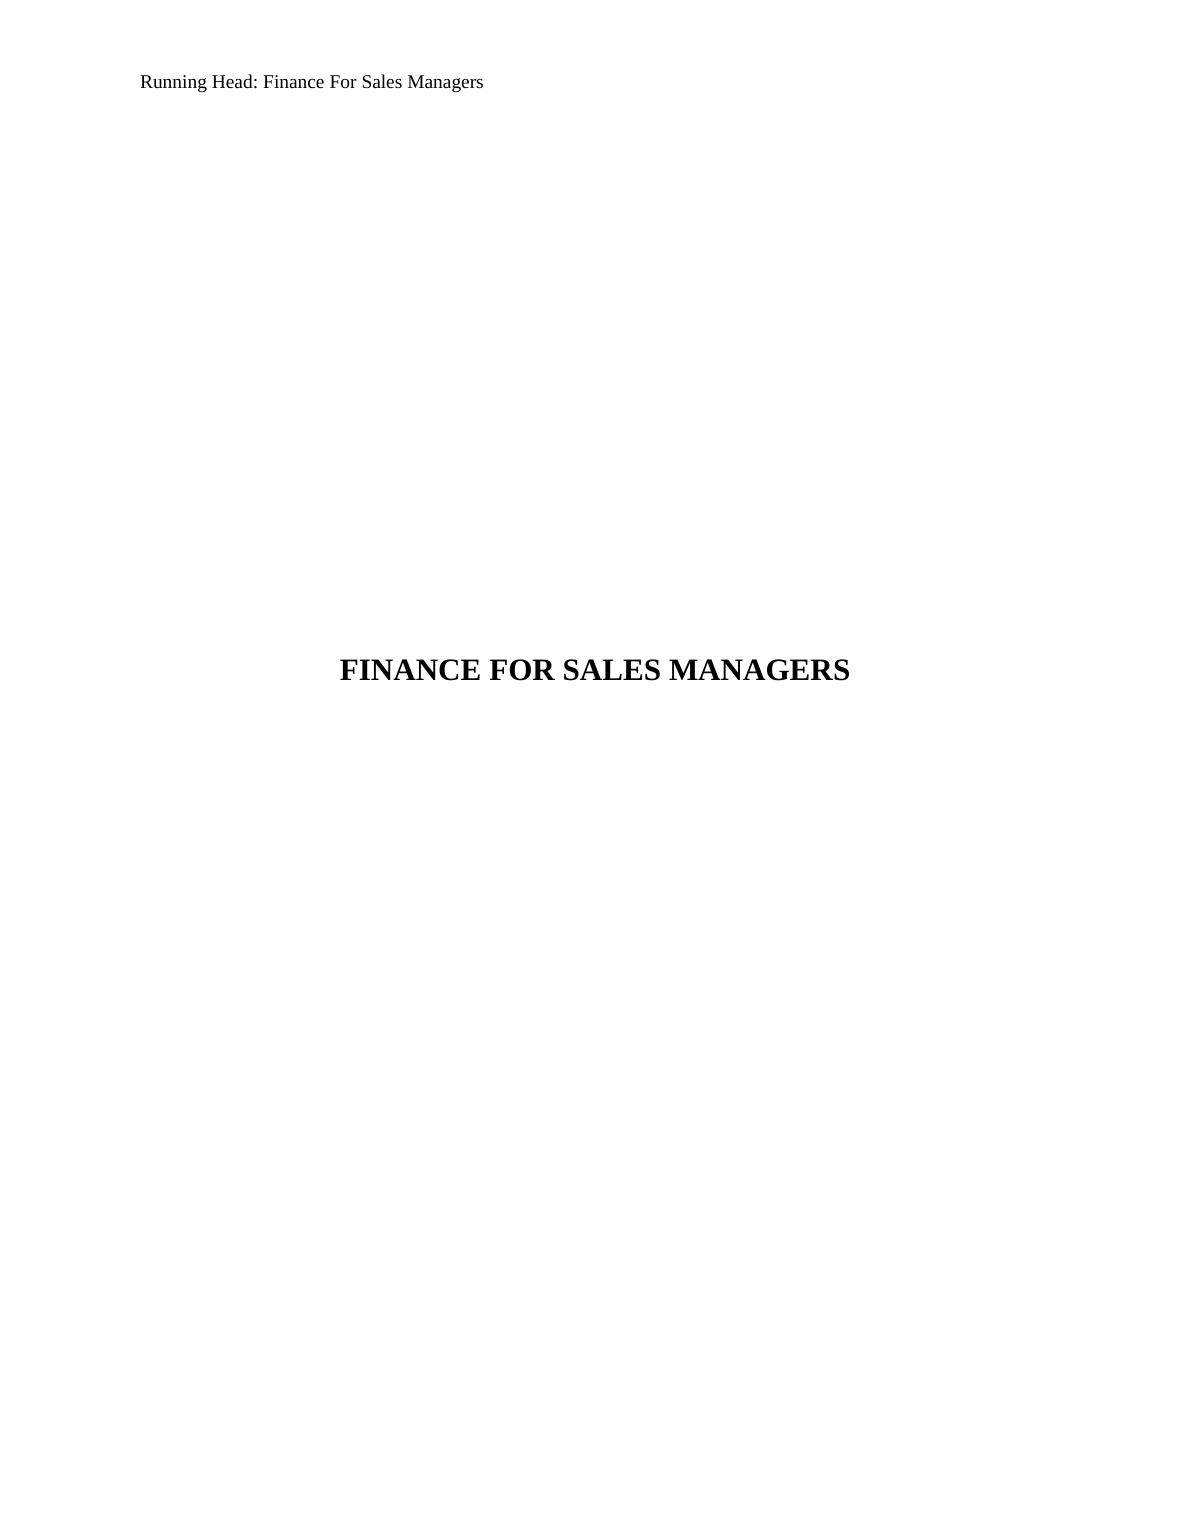 Finance For Sales Managers (Doc)_1